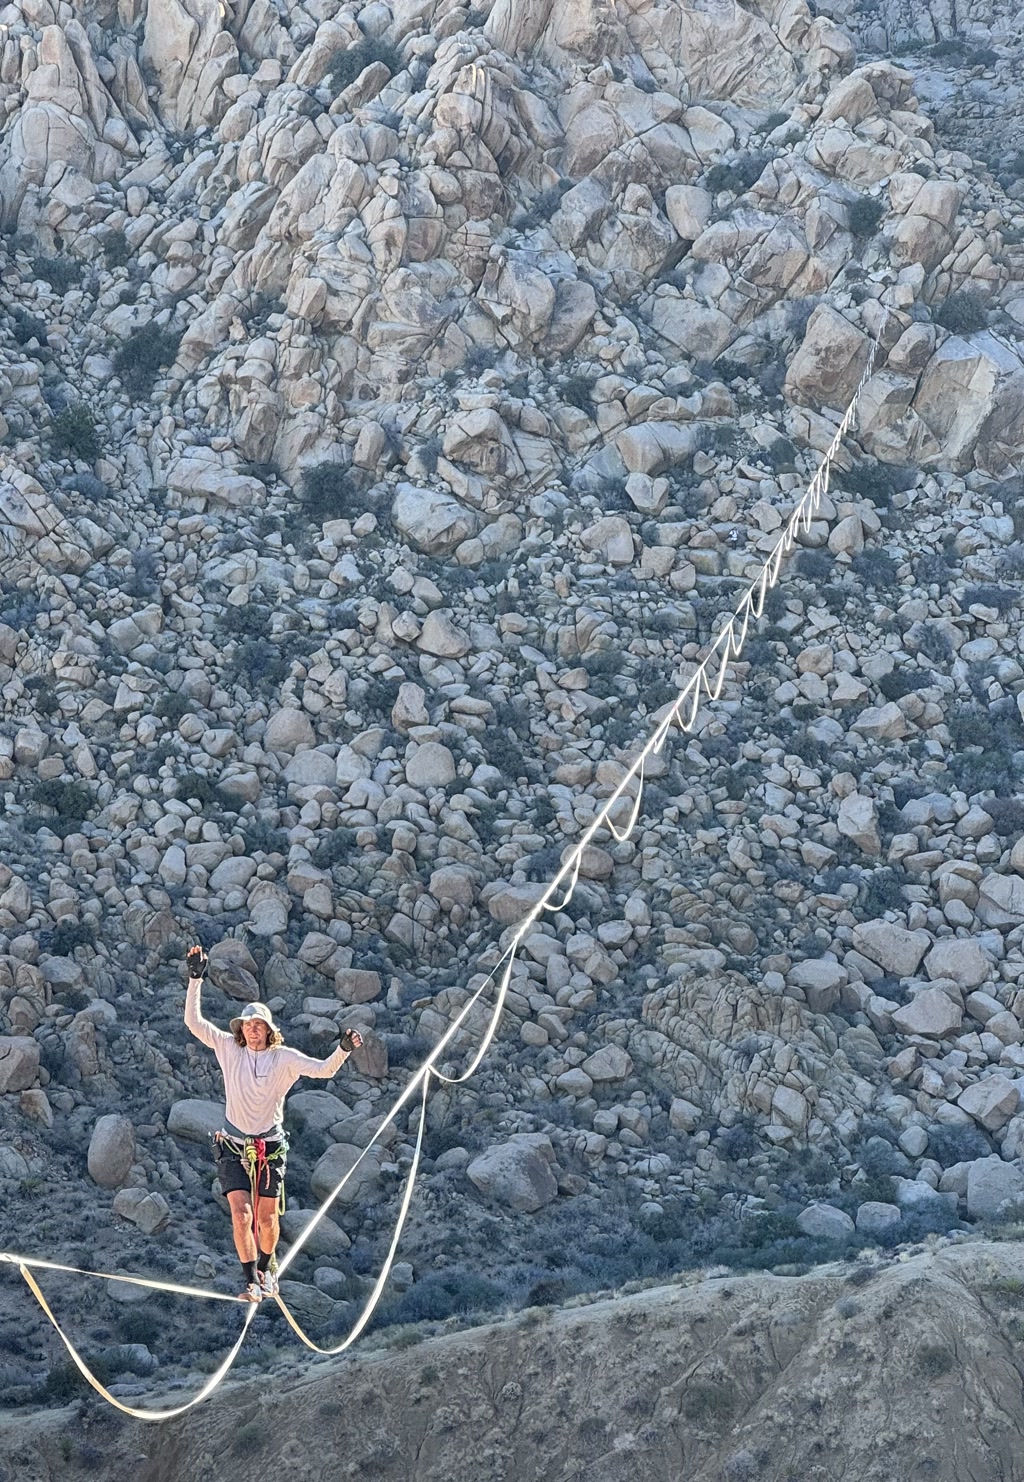 A person is engaging in highlining (slacklining at a significant height) across a large gap between rock formations. They are standing on a thin line stretched taut between the two points. Below, the terrain is rugged and strewn with numerous stones and boulders. The highliner is wearing casual athletic clothing, along with a safety harness that is presumably attached to the line for security. They are raising their arms, possibly in triumph or balance, set against the natural backdrop of the environment. The scene suggests a combination of adventure sports, focus, and the serenity of nature.